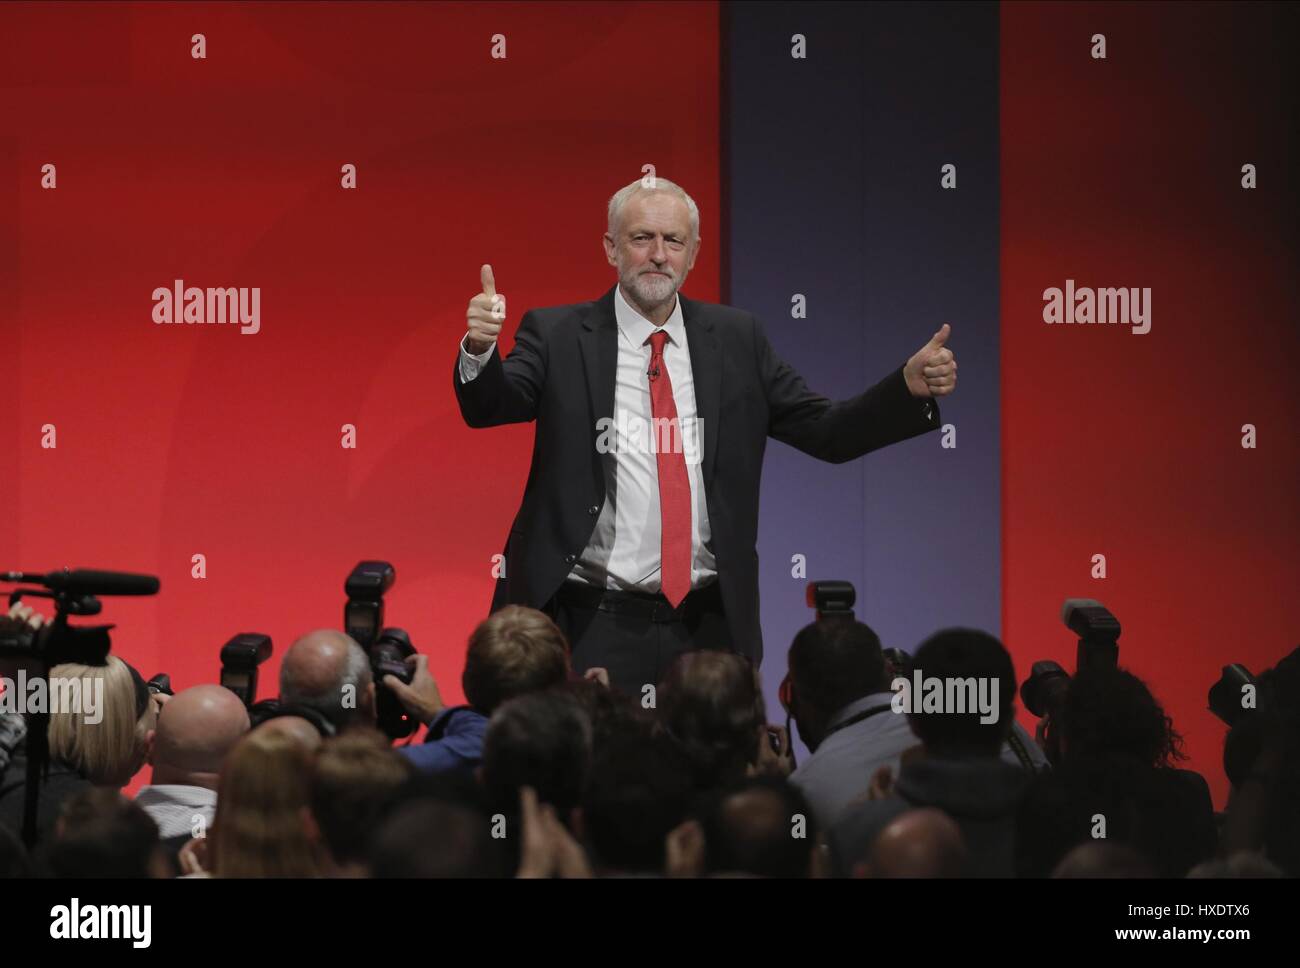 JEREMY CORBYN MP LABOUR PARTY LEADER 28 September 2016 THE ACC LIVERPOOL LIVERPOOL  ENGLAND Stock Photo